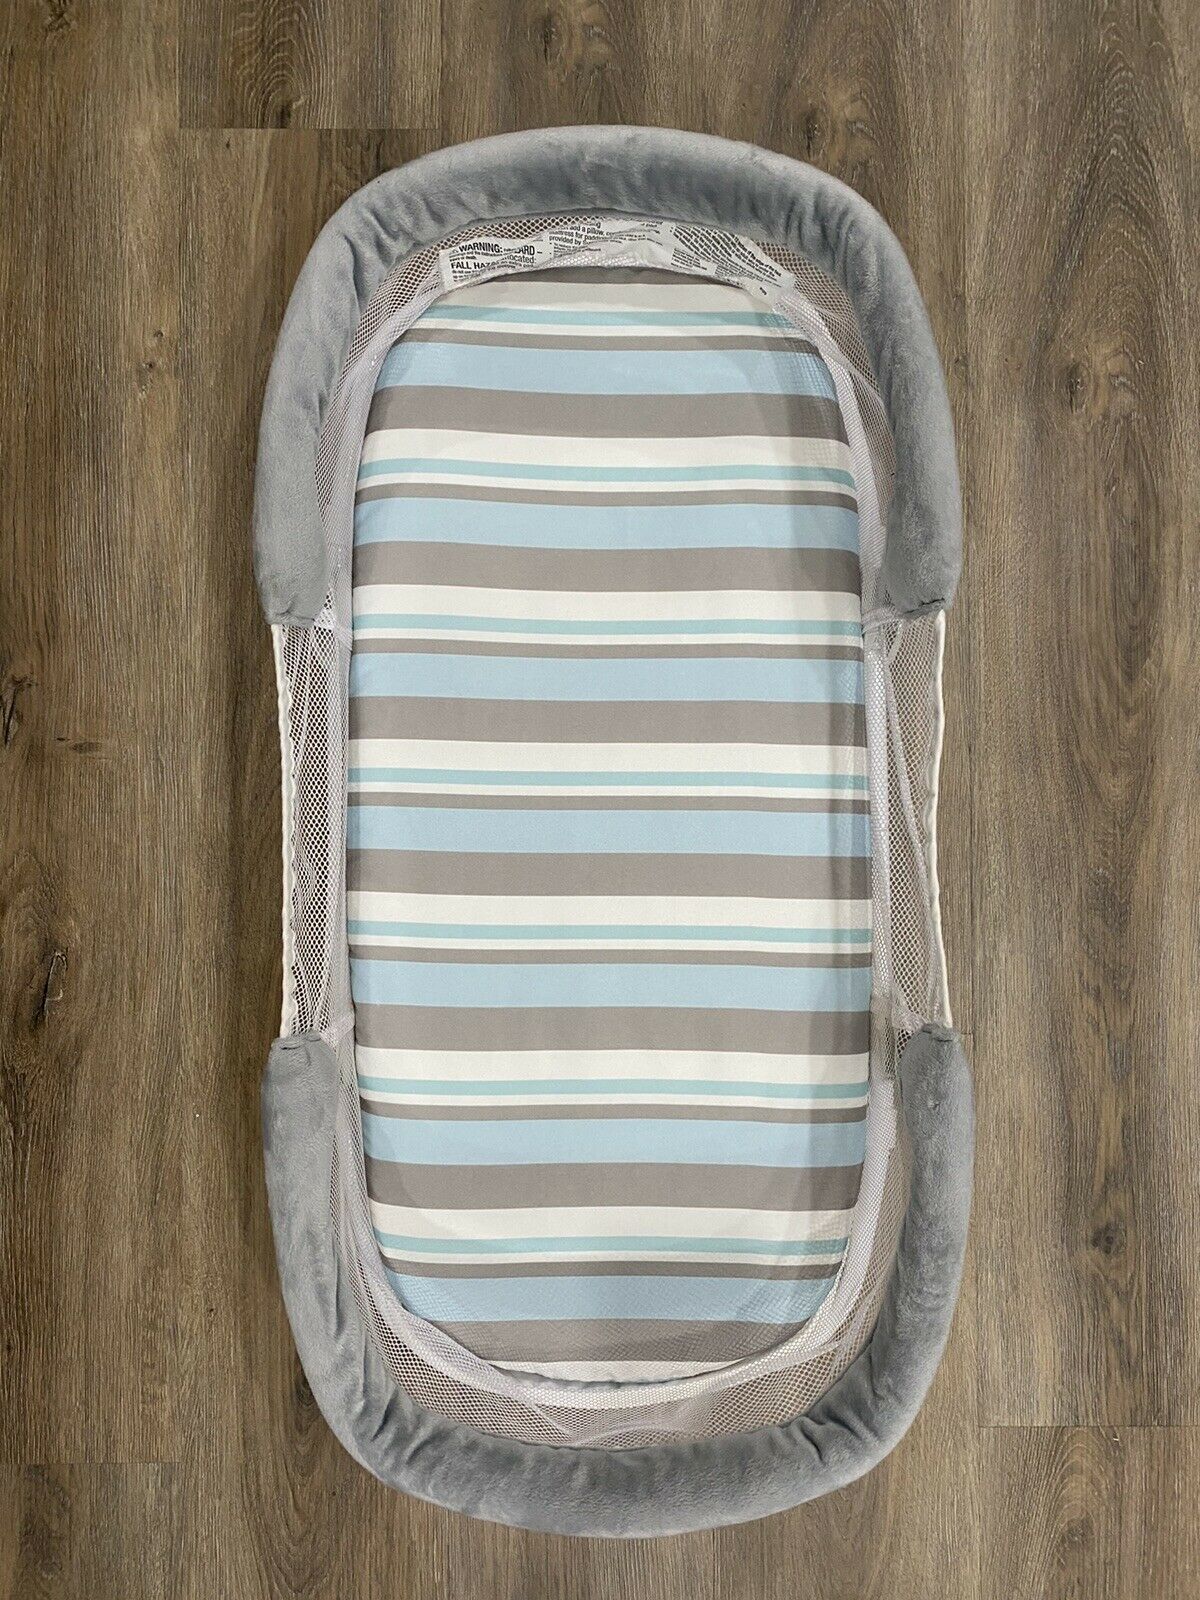 Baby Bassinet Nest Baby Lounger Co-sleeping Crib Bed For Bedroom Travel Napping